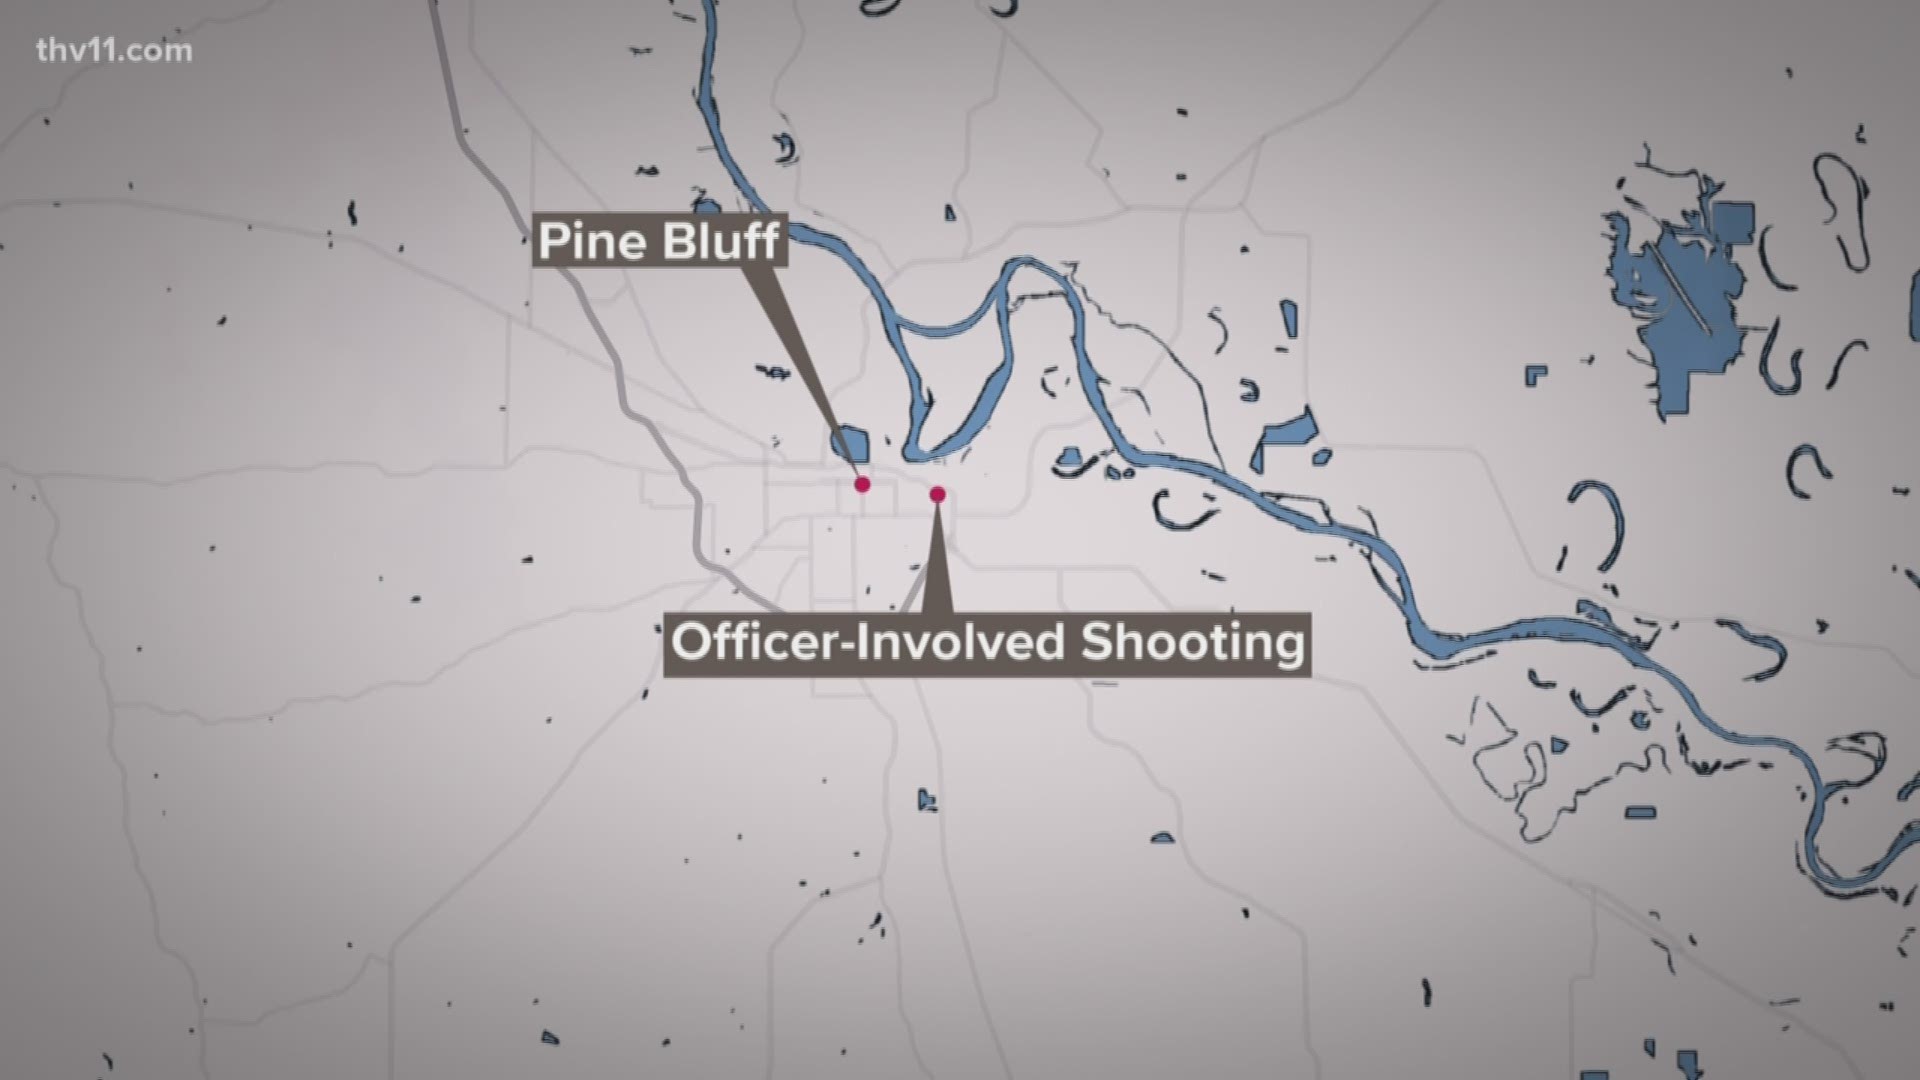 We now know the name of the man who was killed in an officer-involved shooting in Pine Bluff.